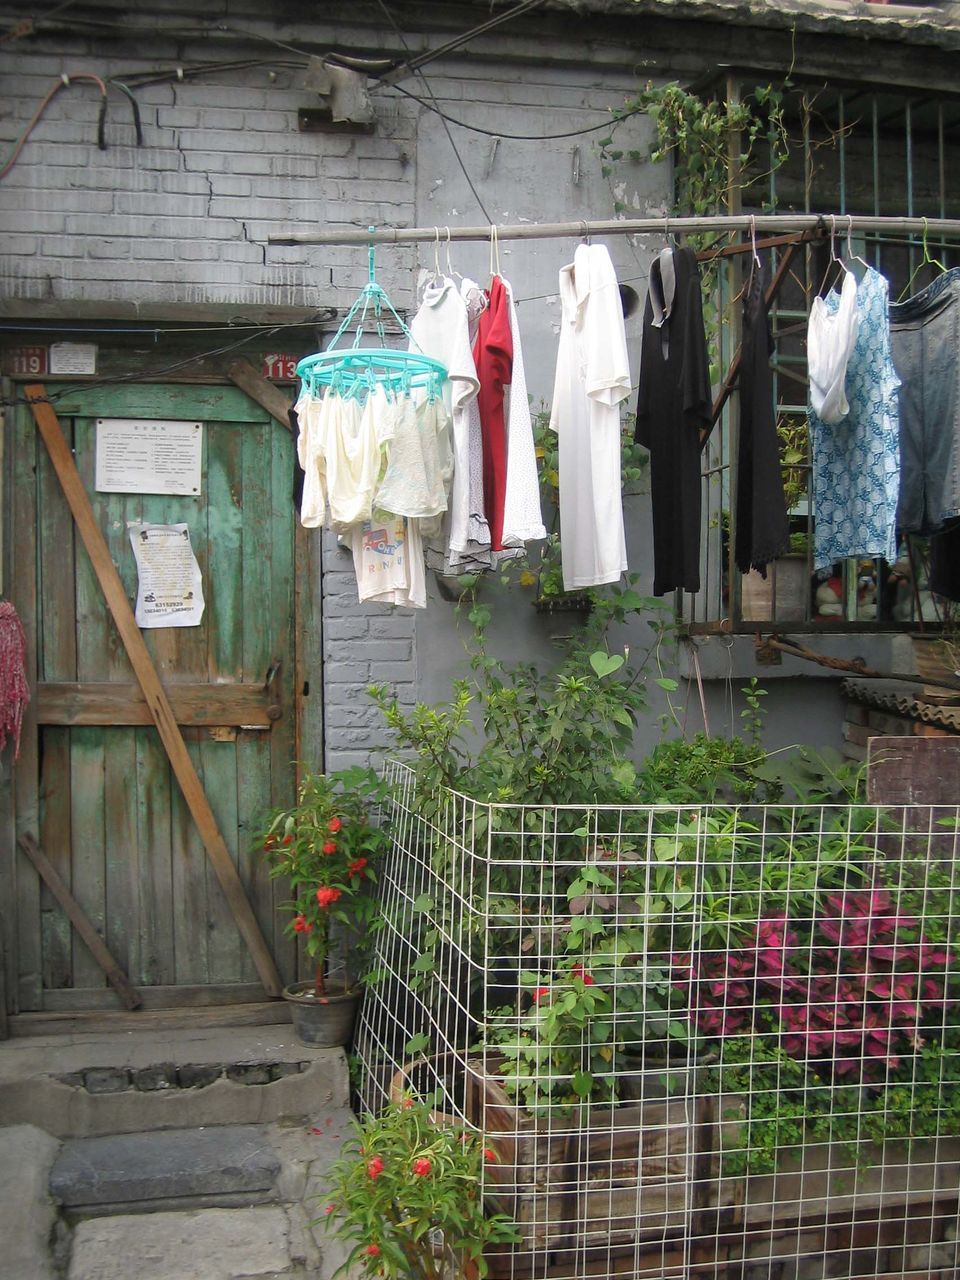 CLOTHES DRYING ON CLOTHESLINE AGAINST WALL